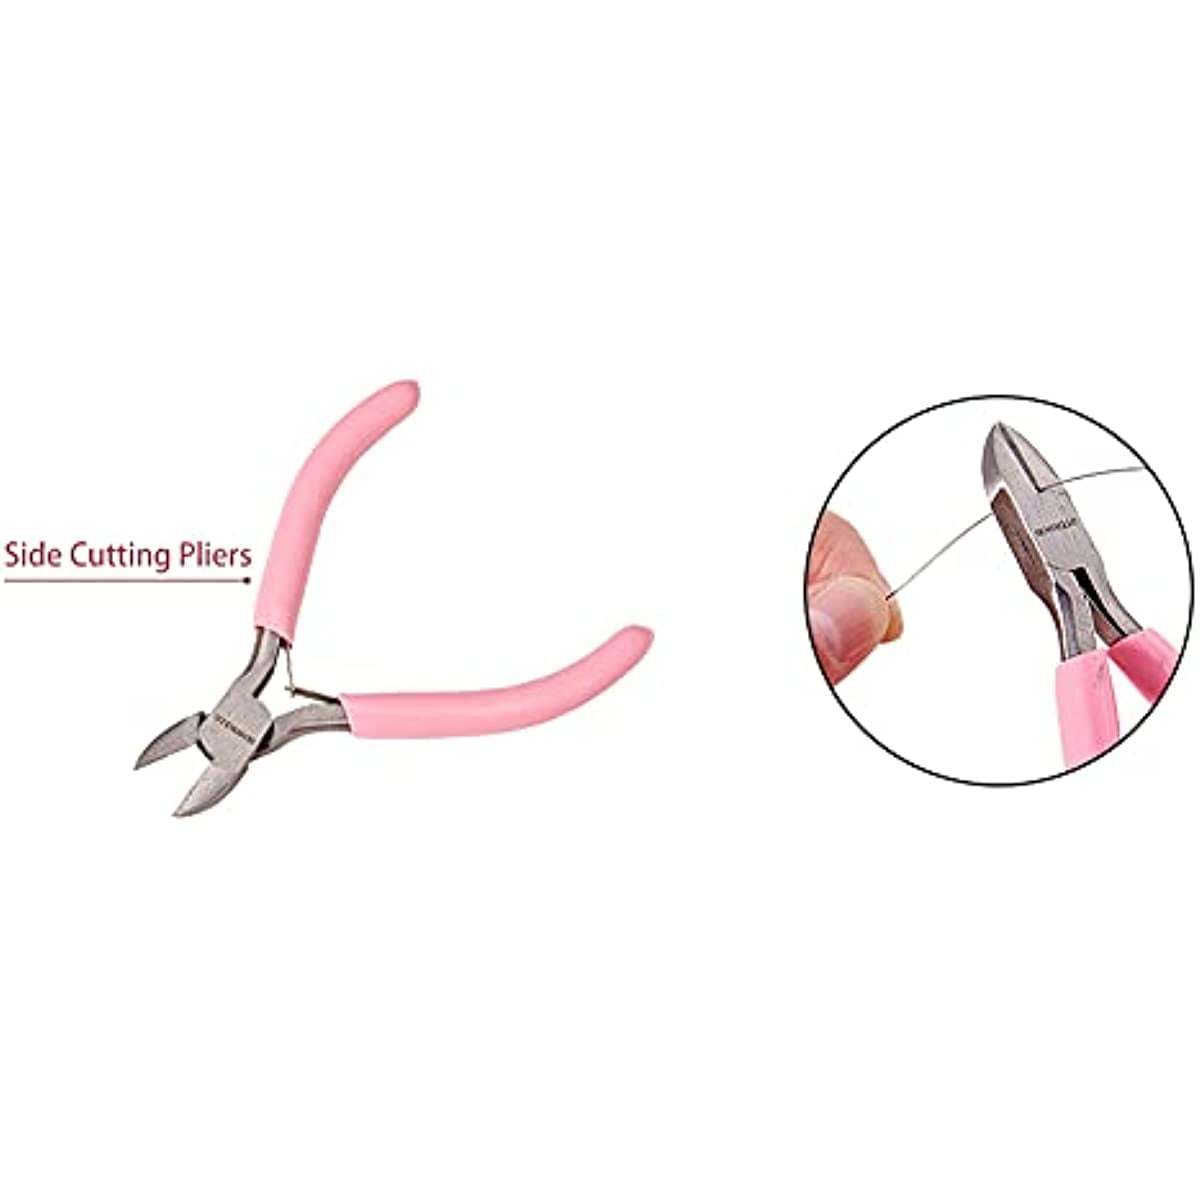 4.4 Inch Side Cutting Pliers Flush Cutter Pliers Wire Cutter Precision  Beading Pliers Jewelry Wire Looping Bending Tools for DIY Jewelry Making  Hobby